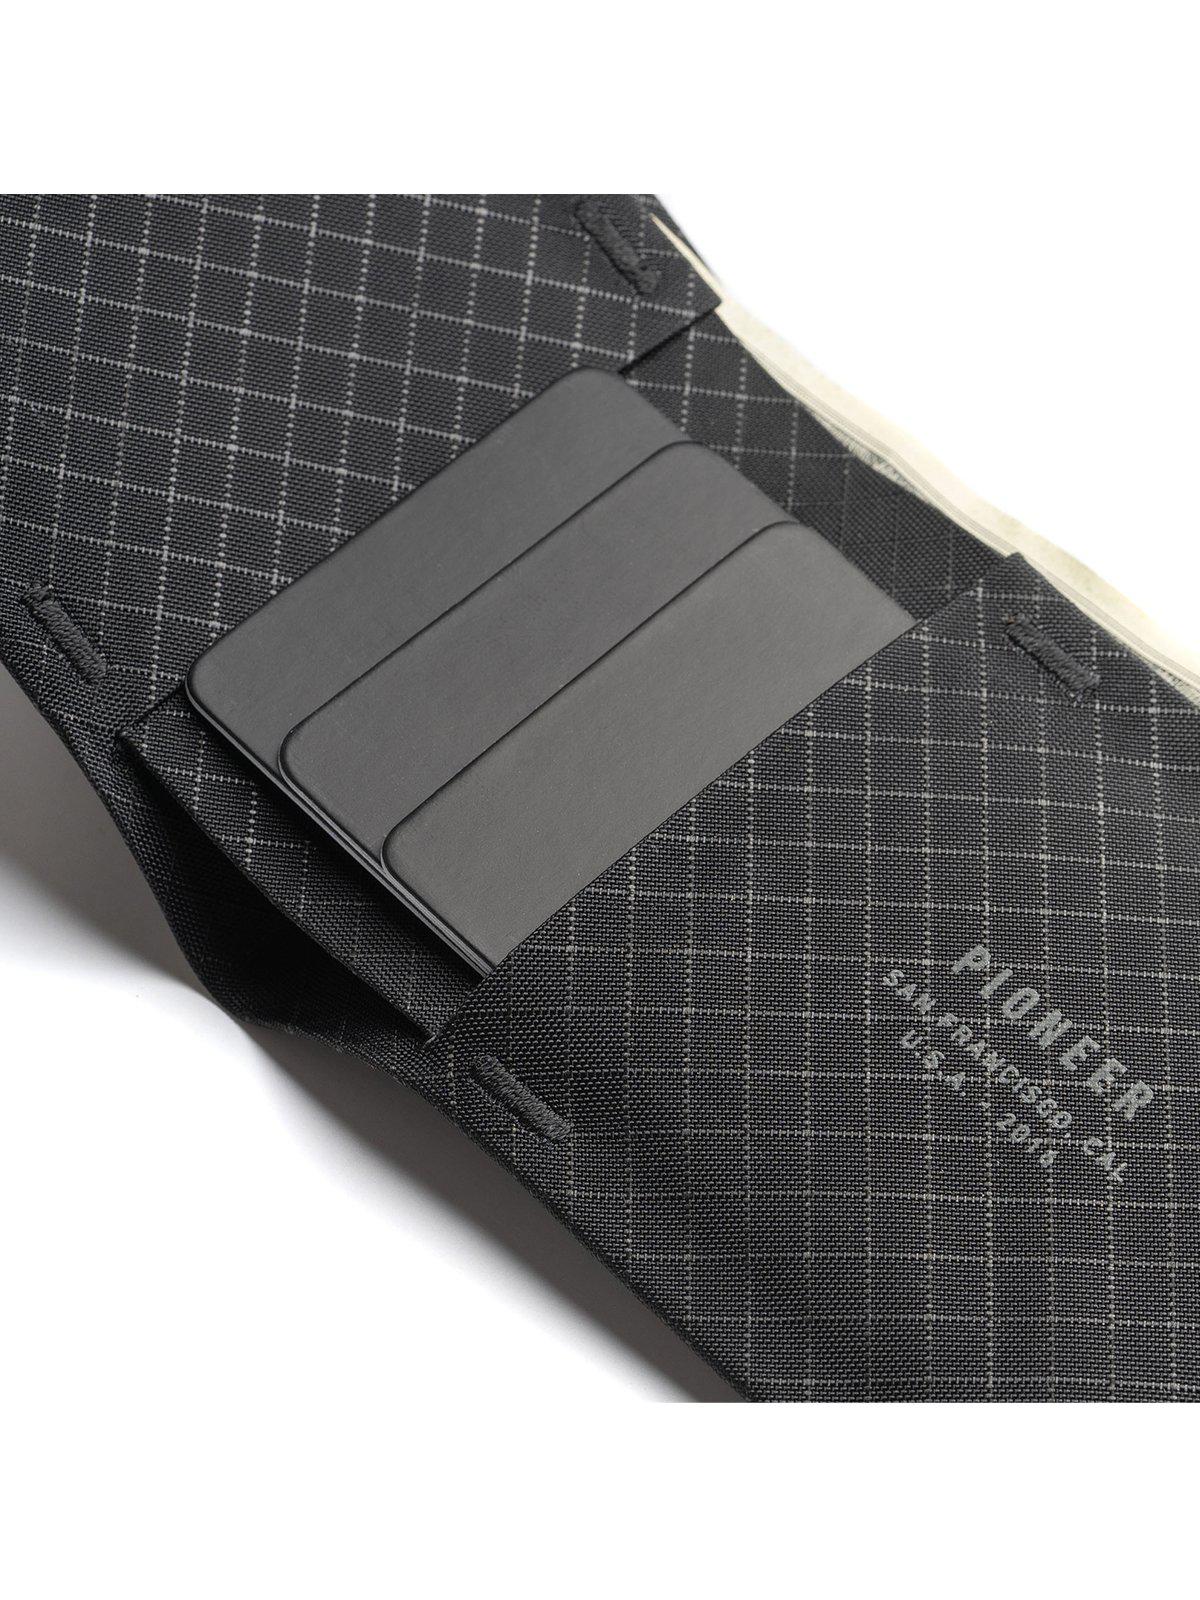 Pioneer The Flyfold Wallet 10XD Ripstop Onyx RFID - MORE by Morello Indonesia